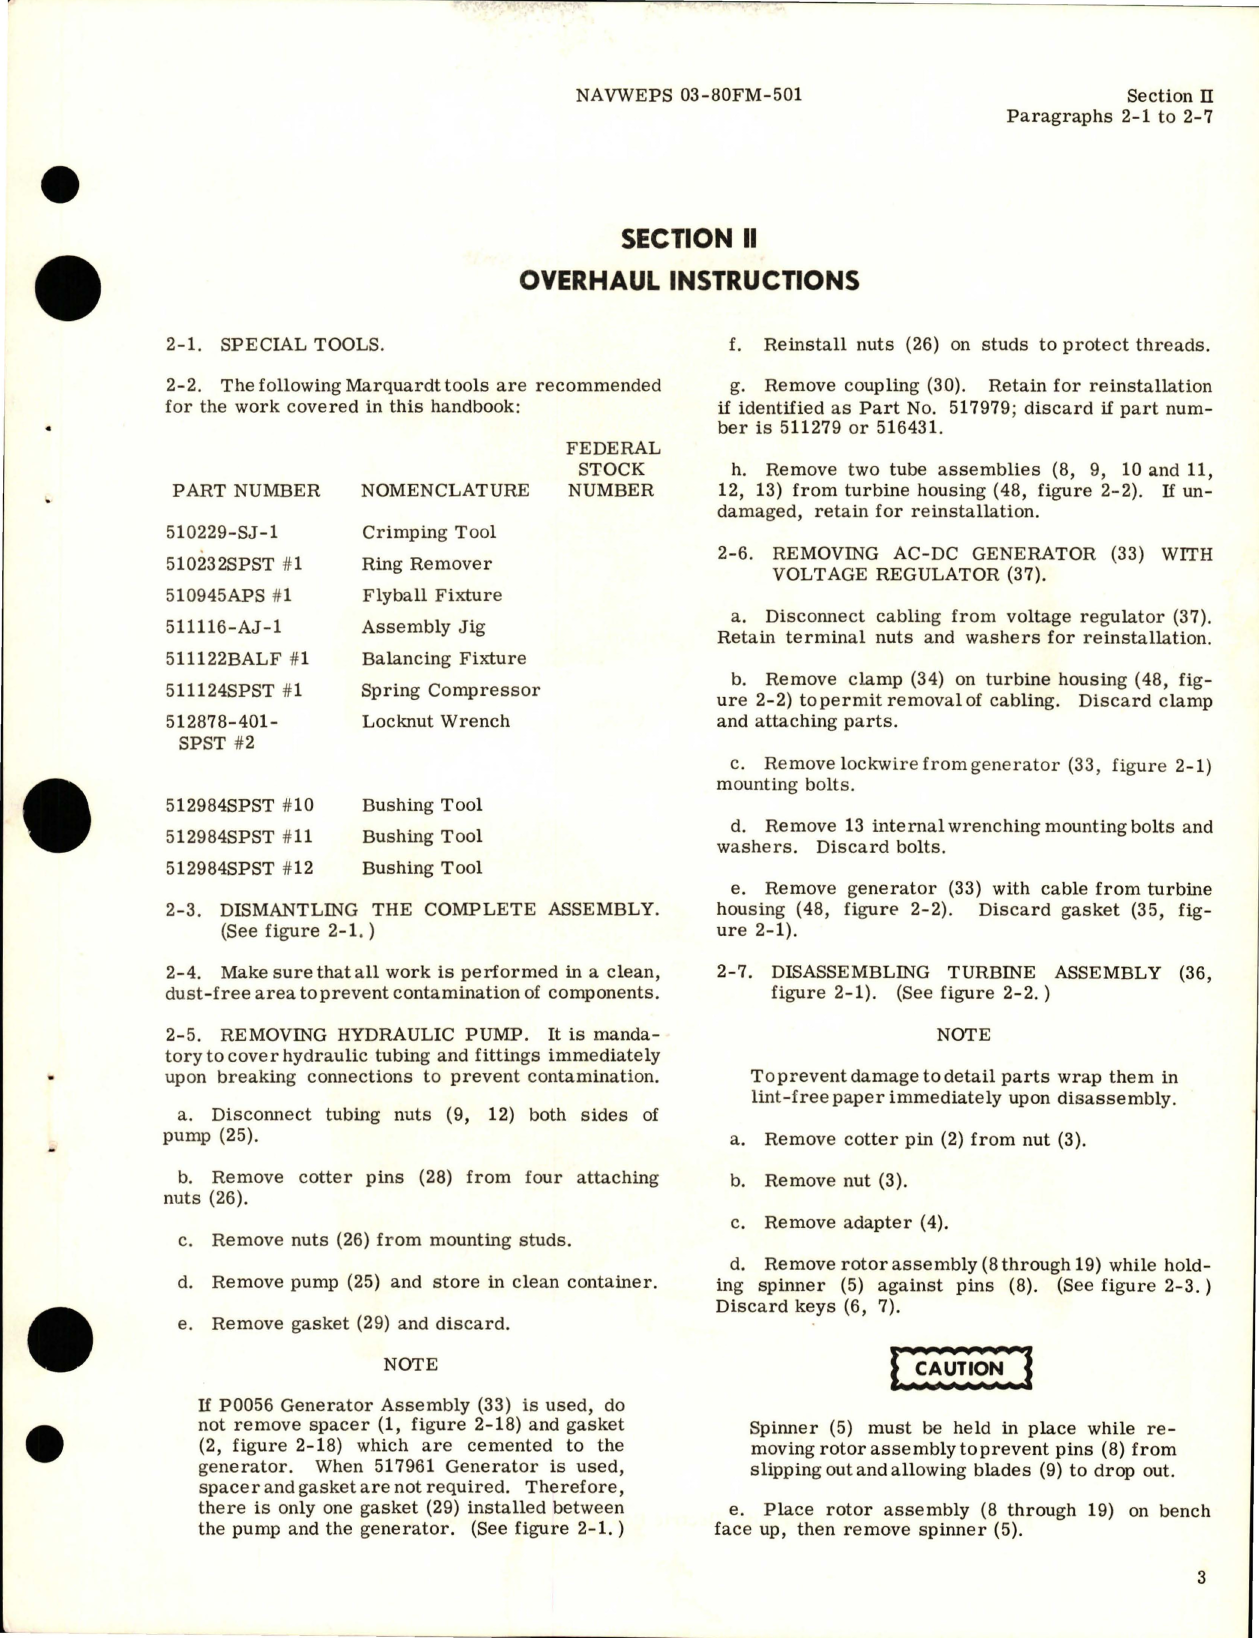 Sample page 7 from AirCorps Library document: Overhaul Instructions for Ram Air Hydraulic Electric Power Package - Models AD6A-1, AD6A-2, and AD6A-4